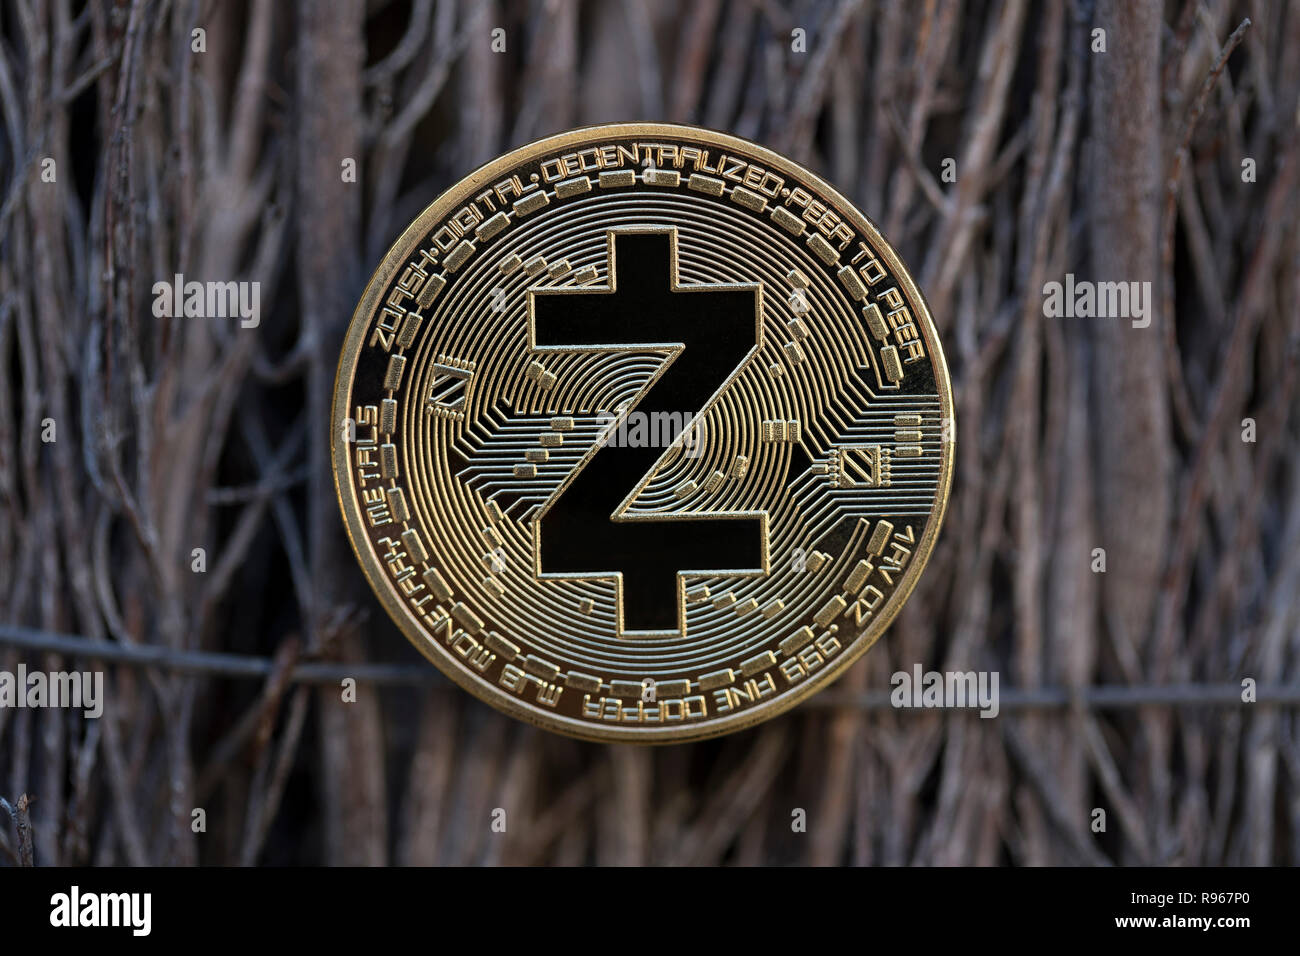 Z-Cash cryptocurrency physical coin placed on bound branches Stock Photo